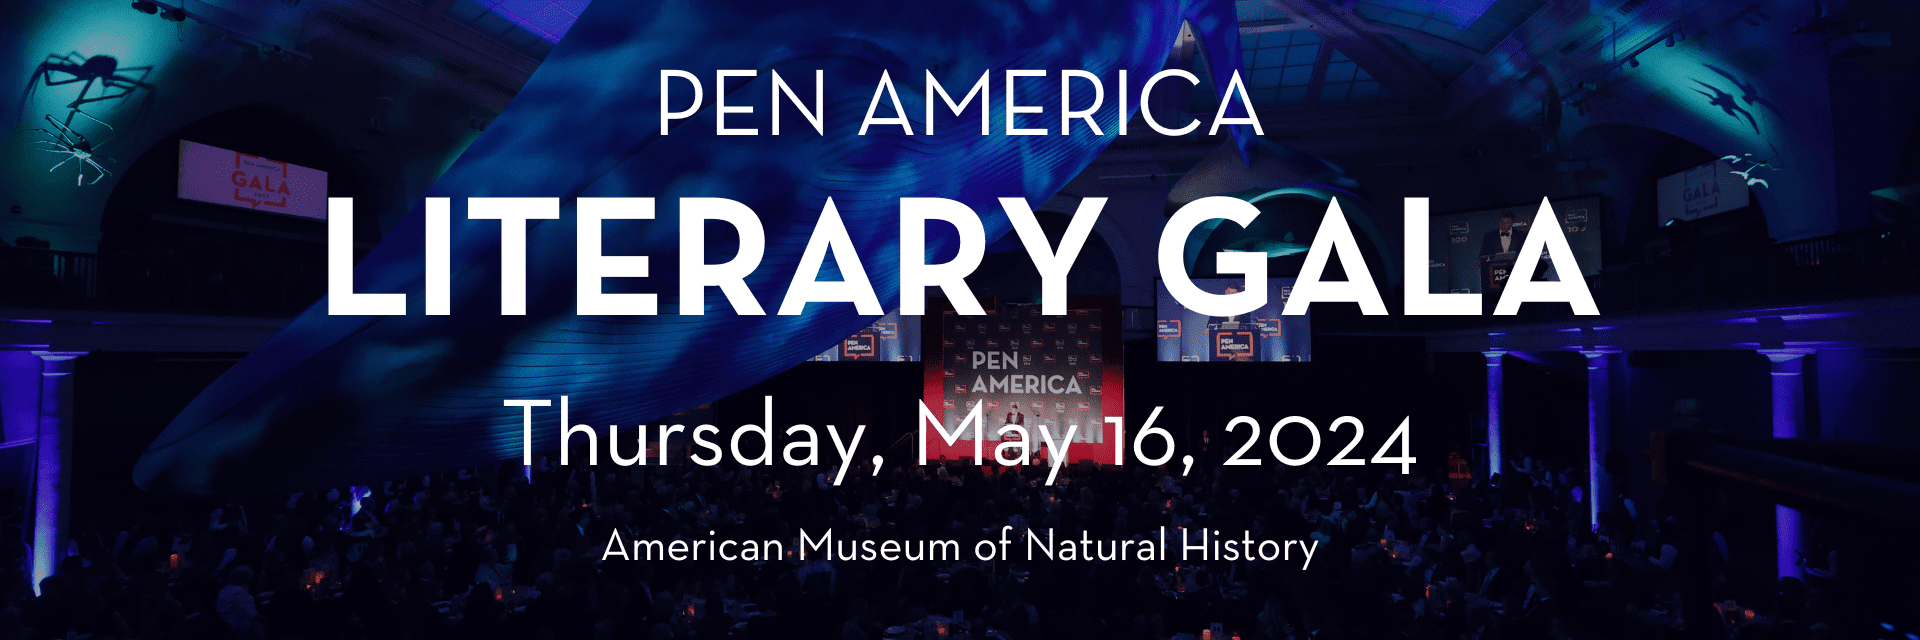 PEN America Literary Gala Thursday May 16, 2024 American Museum of Natural History